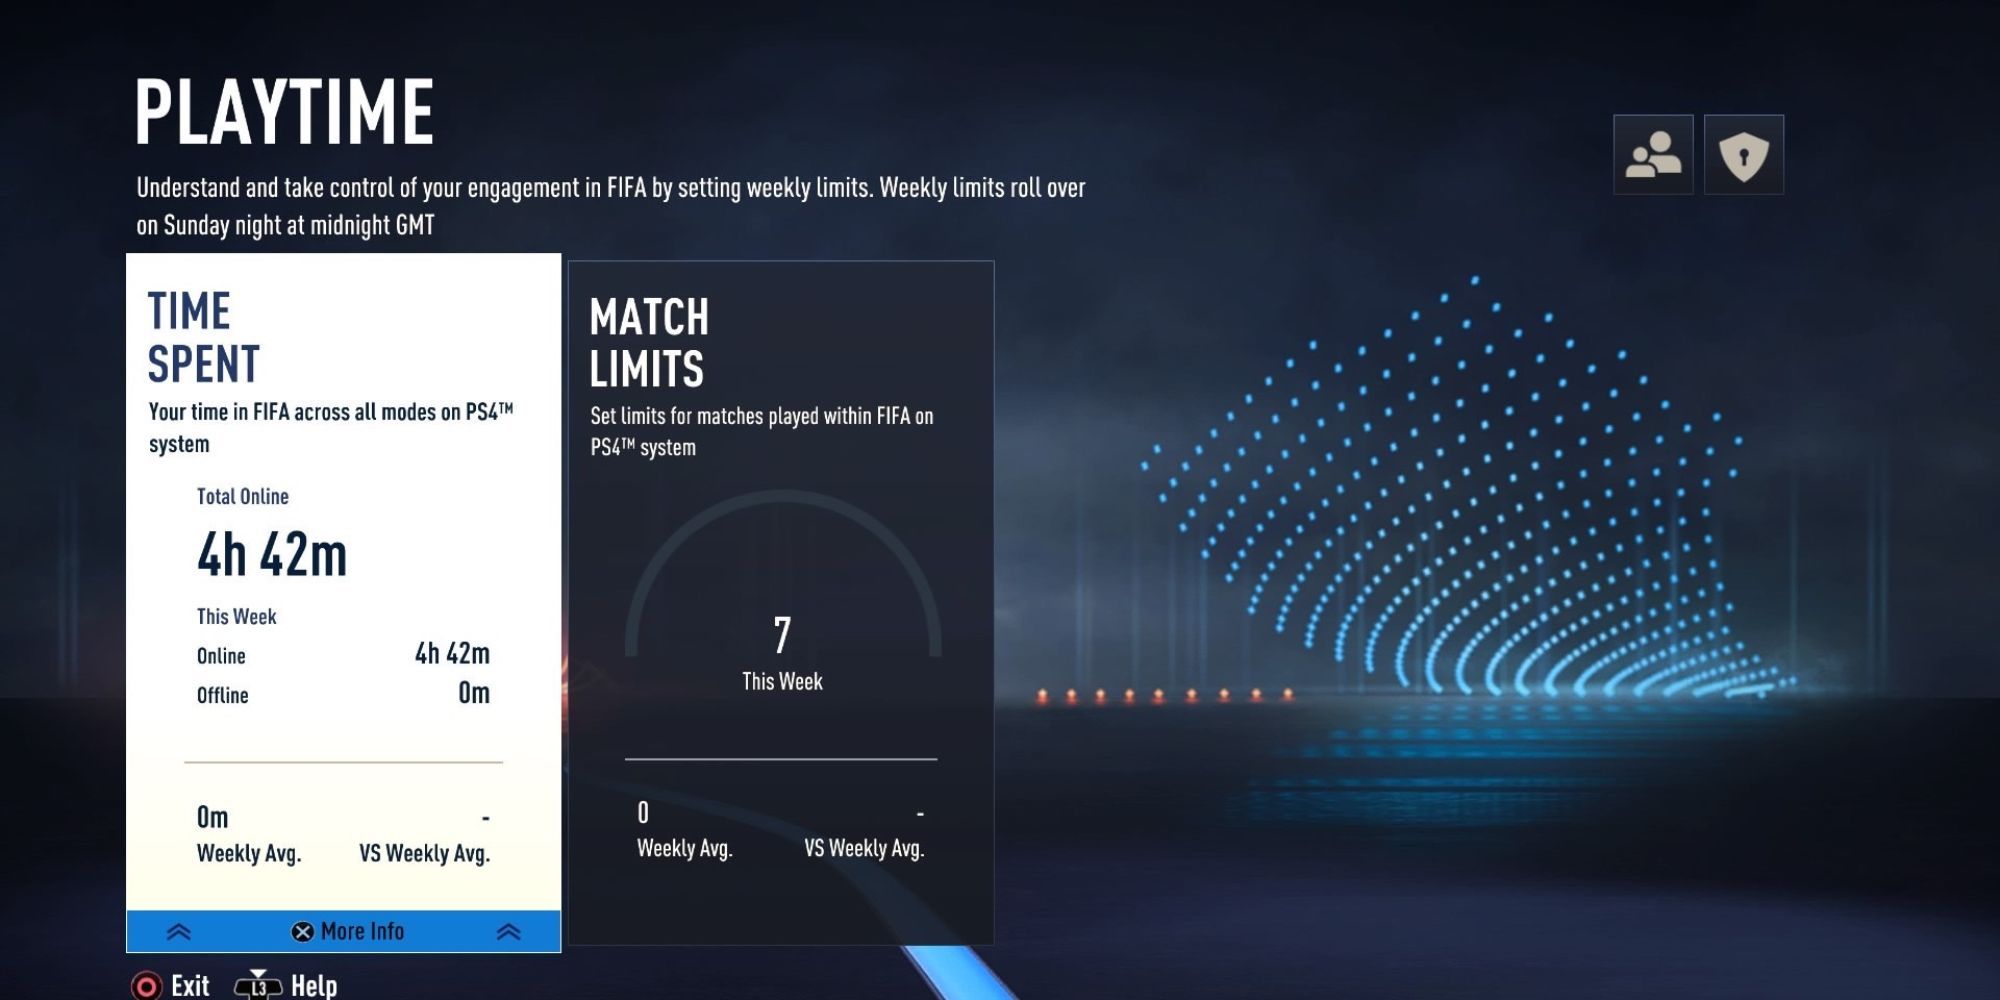 The Playtime page on FIFA 23